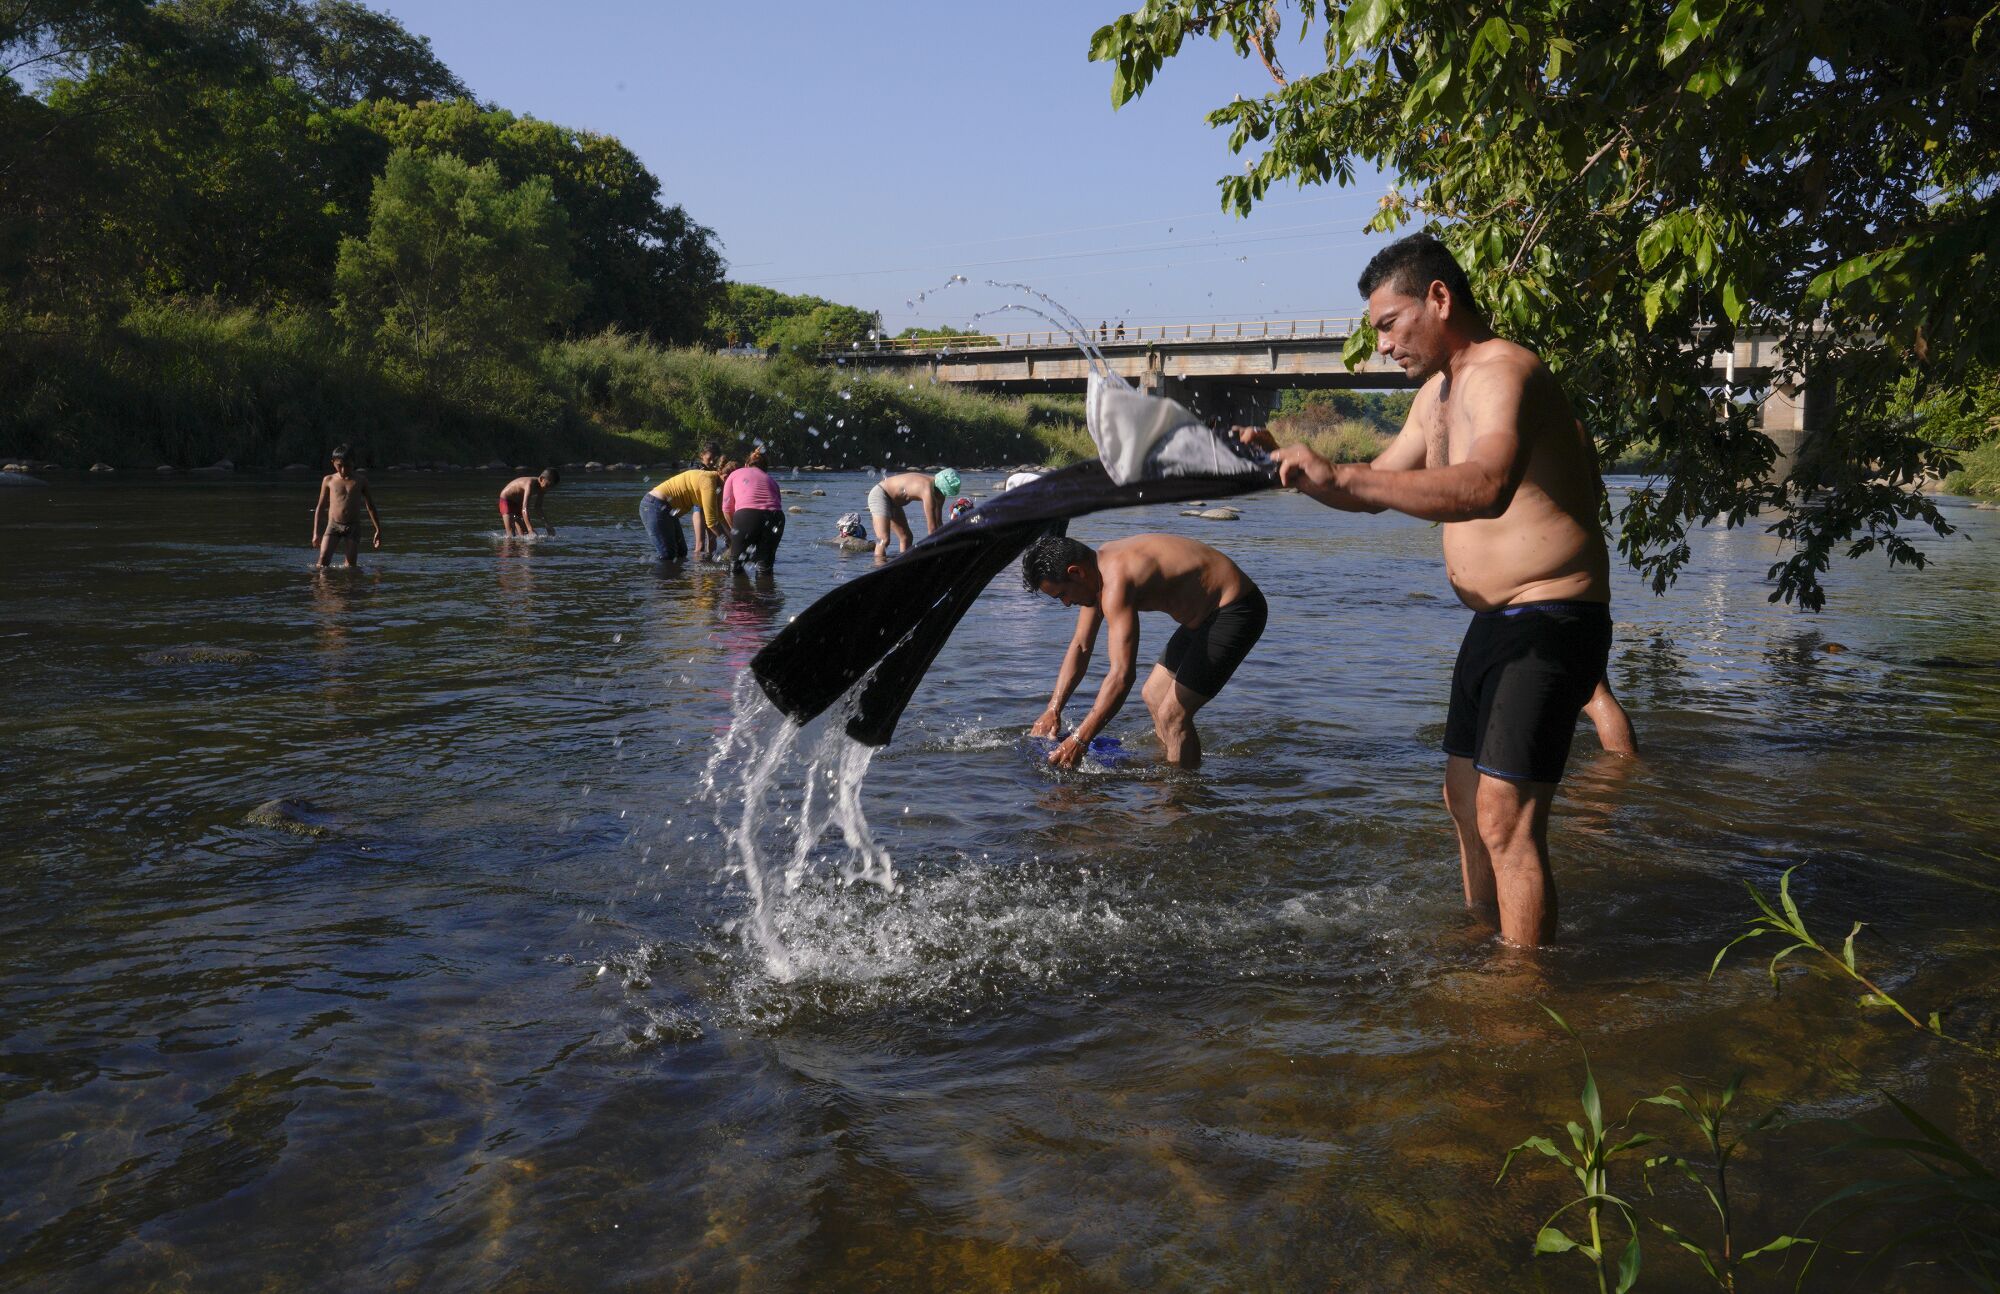 JANUARY 19, 2019, TAPACHULA, MEXICO Men and women take a brief break to bathe in the river in Tapachula , Mexico.